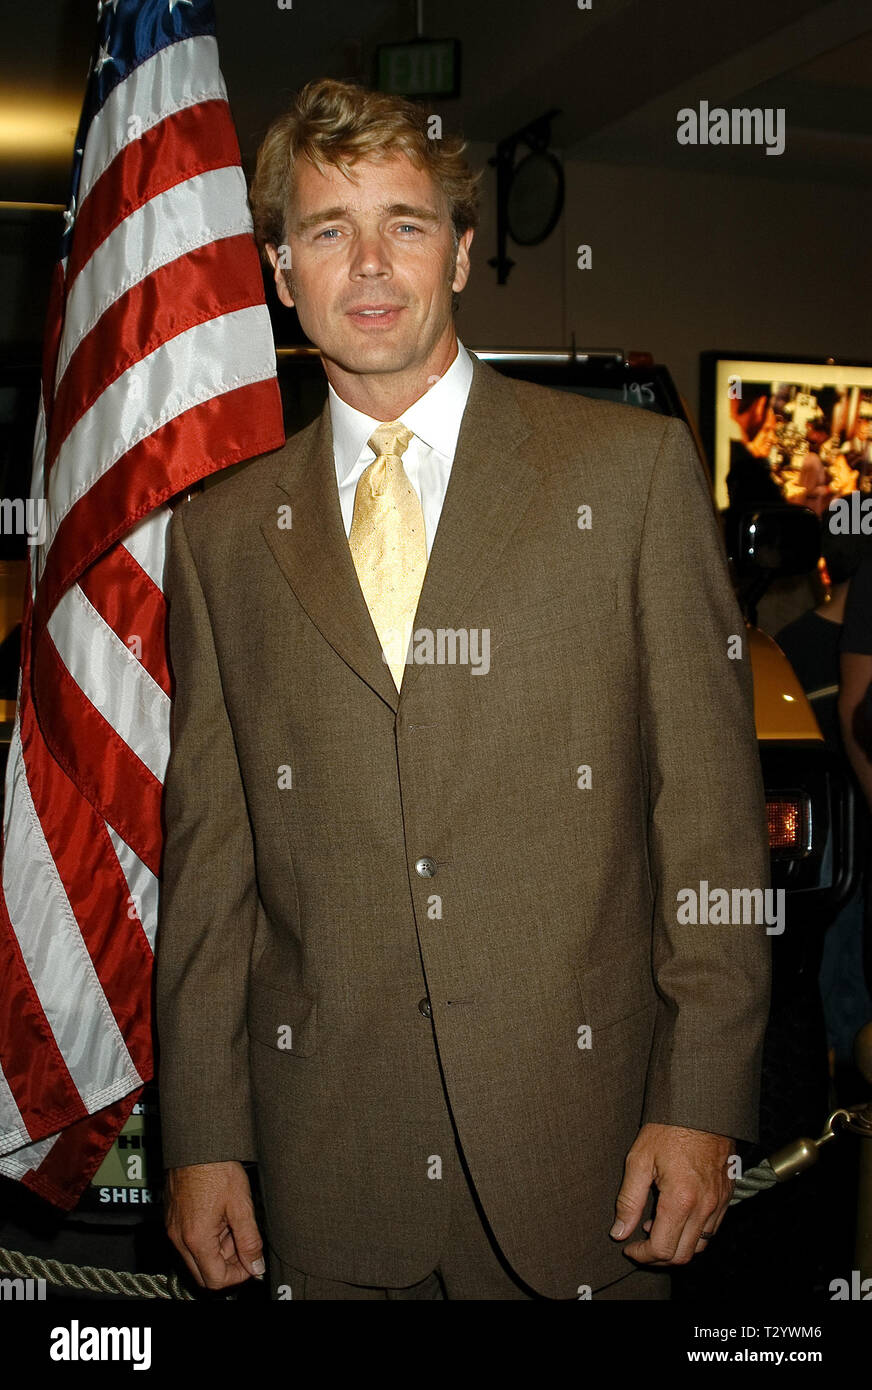 John Schneider at the KTLA and The WB Wednesday Season Premiere Party for 'Angel' and 'Smallville' held at The Grove in Los Angeles, CA, on October 1, 2003. Photo Credit: SBM / PictureLux  File Reference # 33790 744SBMPLX Stock Photo